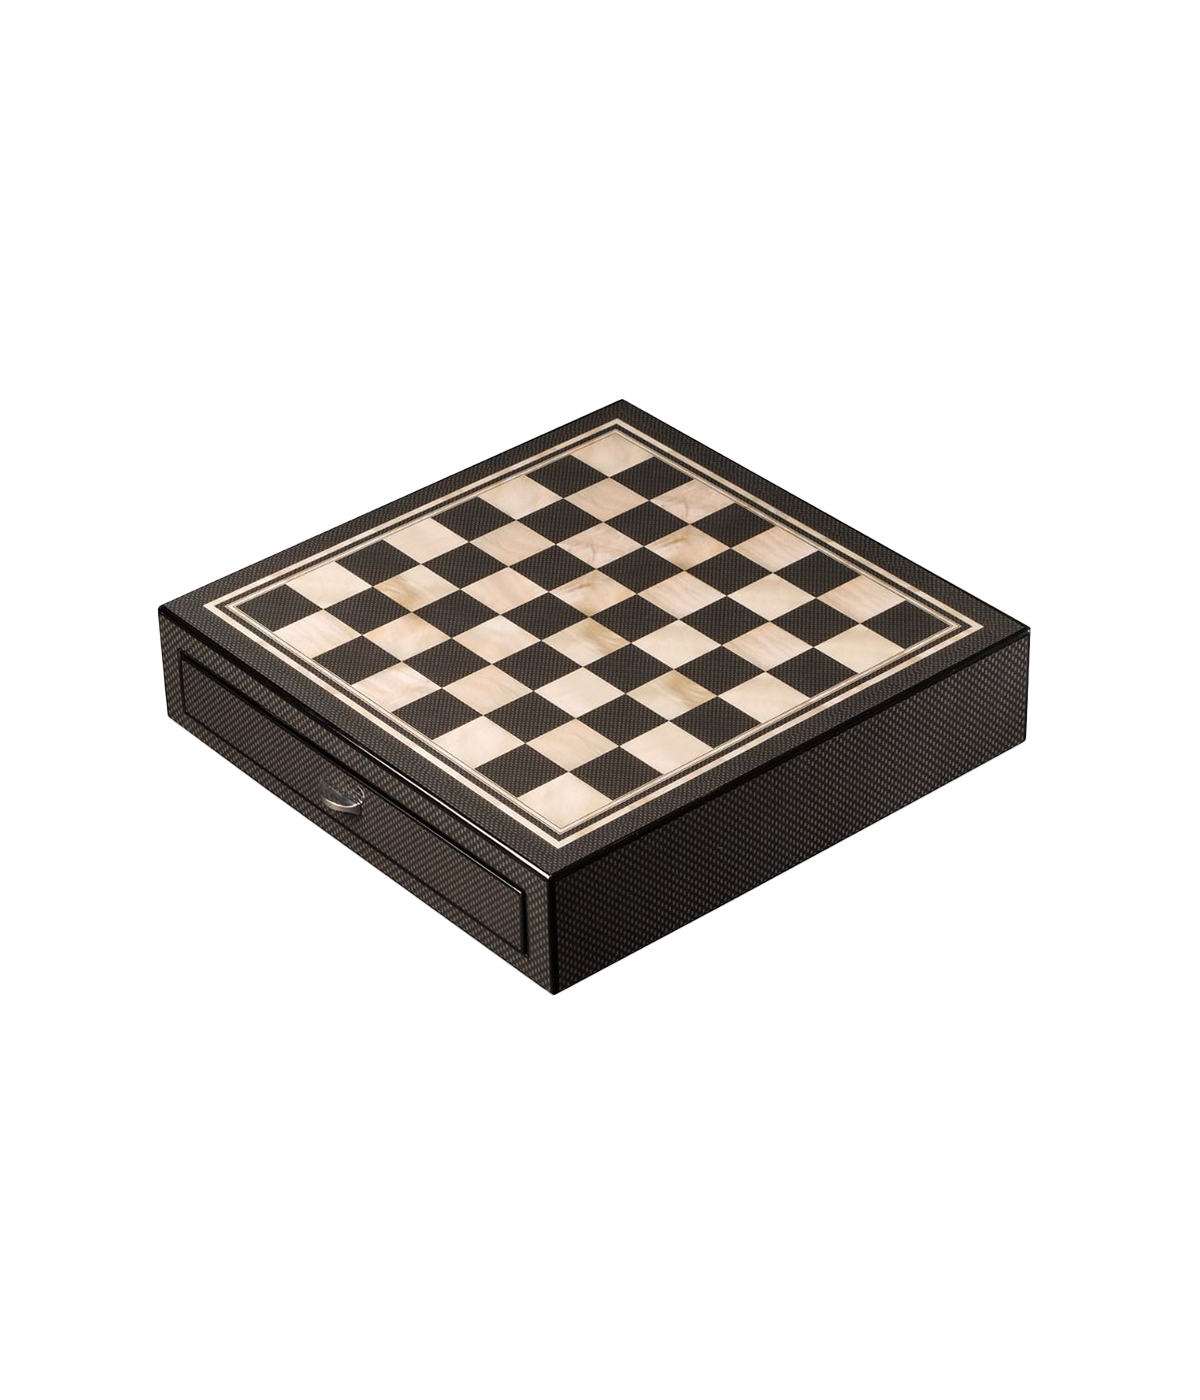 Nolan Chess Set in Carbon Fiber & Mother Of Pearl